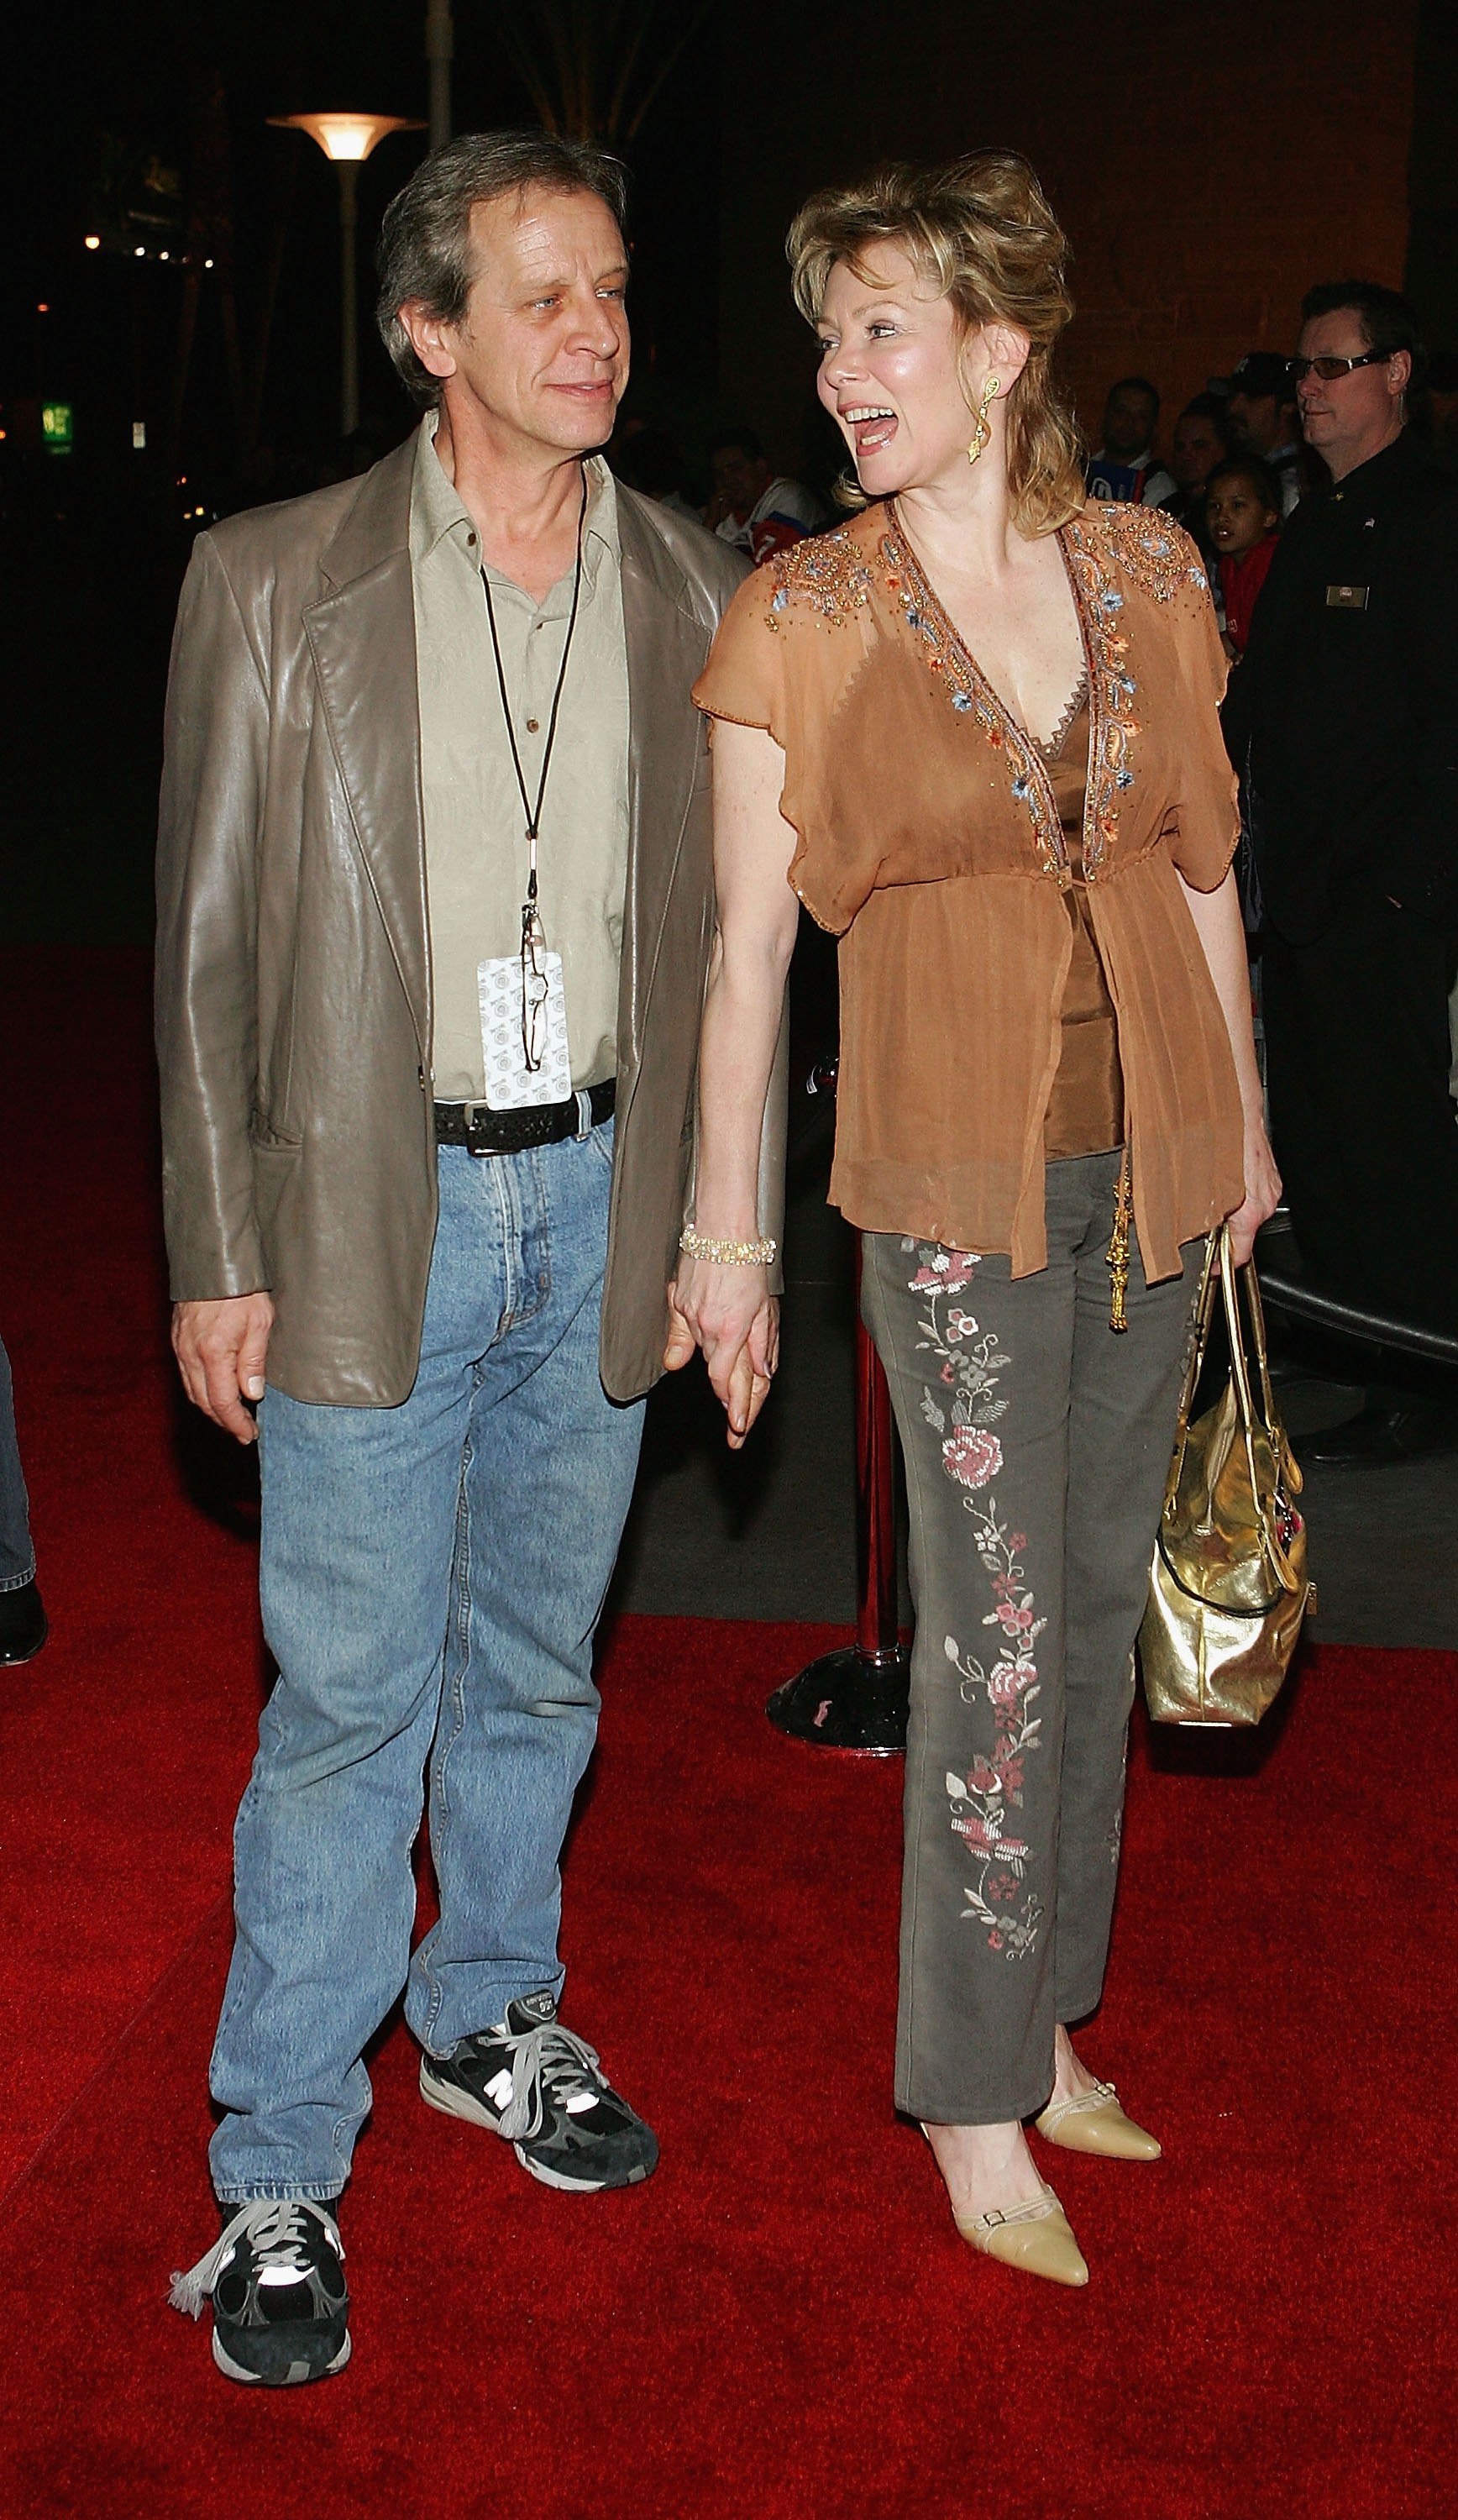 Richard Gilliland and his wife Jean Smart, arrive at the Legends Celebrity Invitational Charity Poker Tournament at the Palms Casino Resort February 3, 2006 in Las Vegas, Nevada. | Source: Getty Images